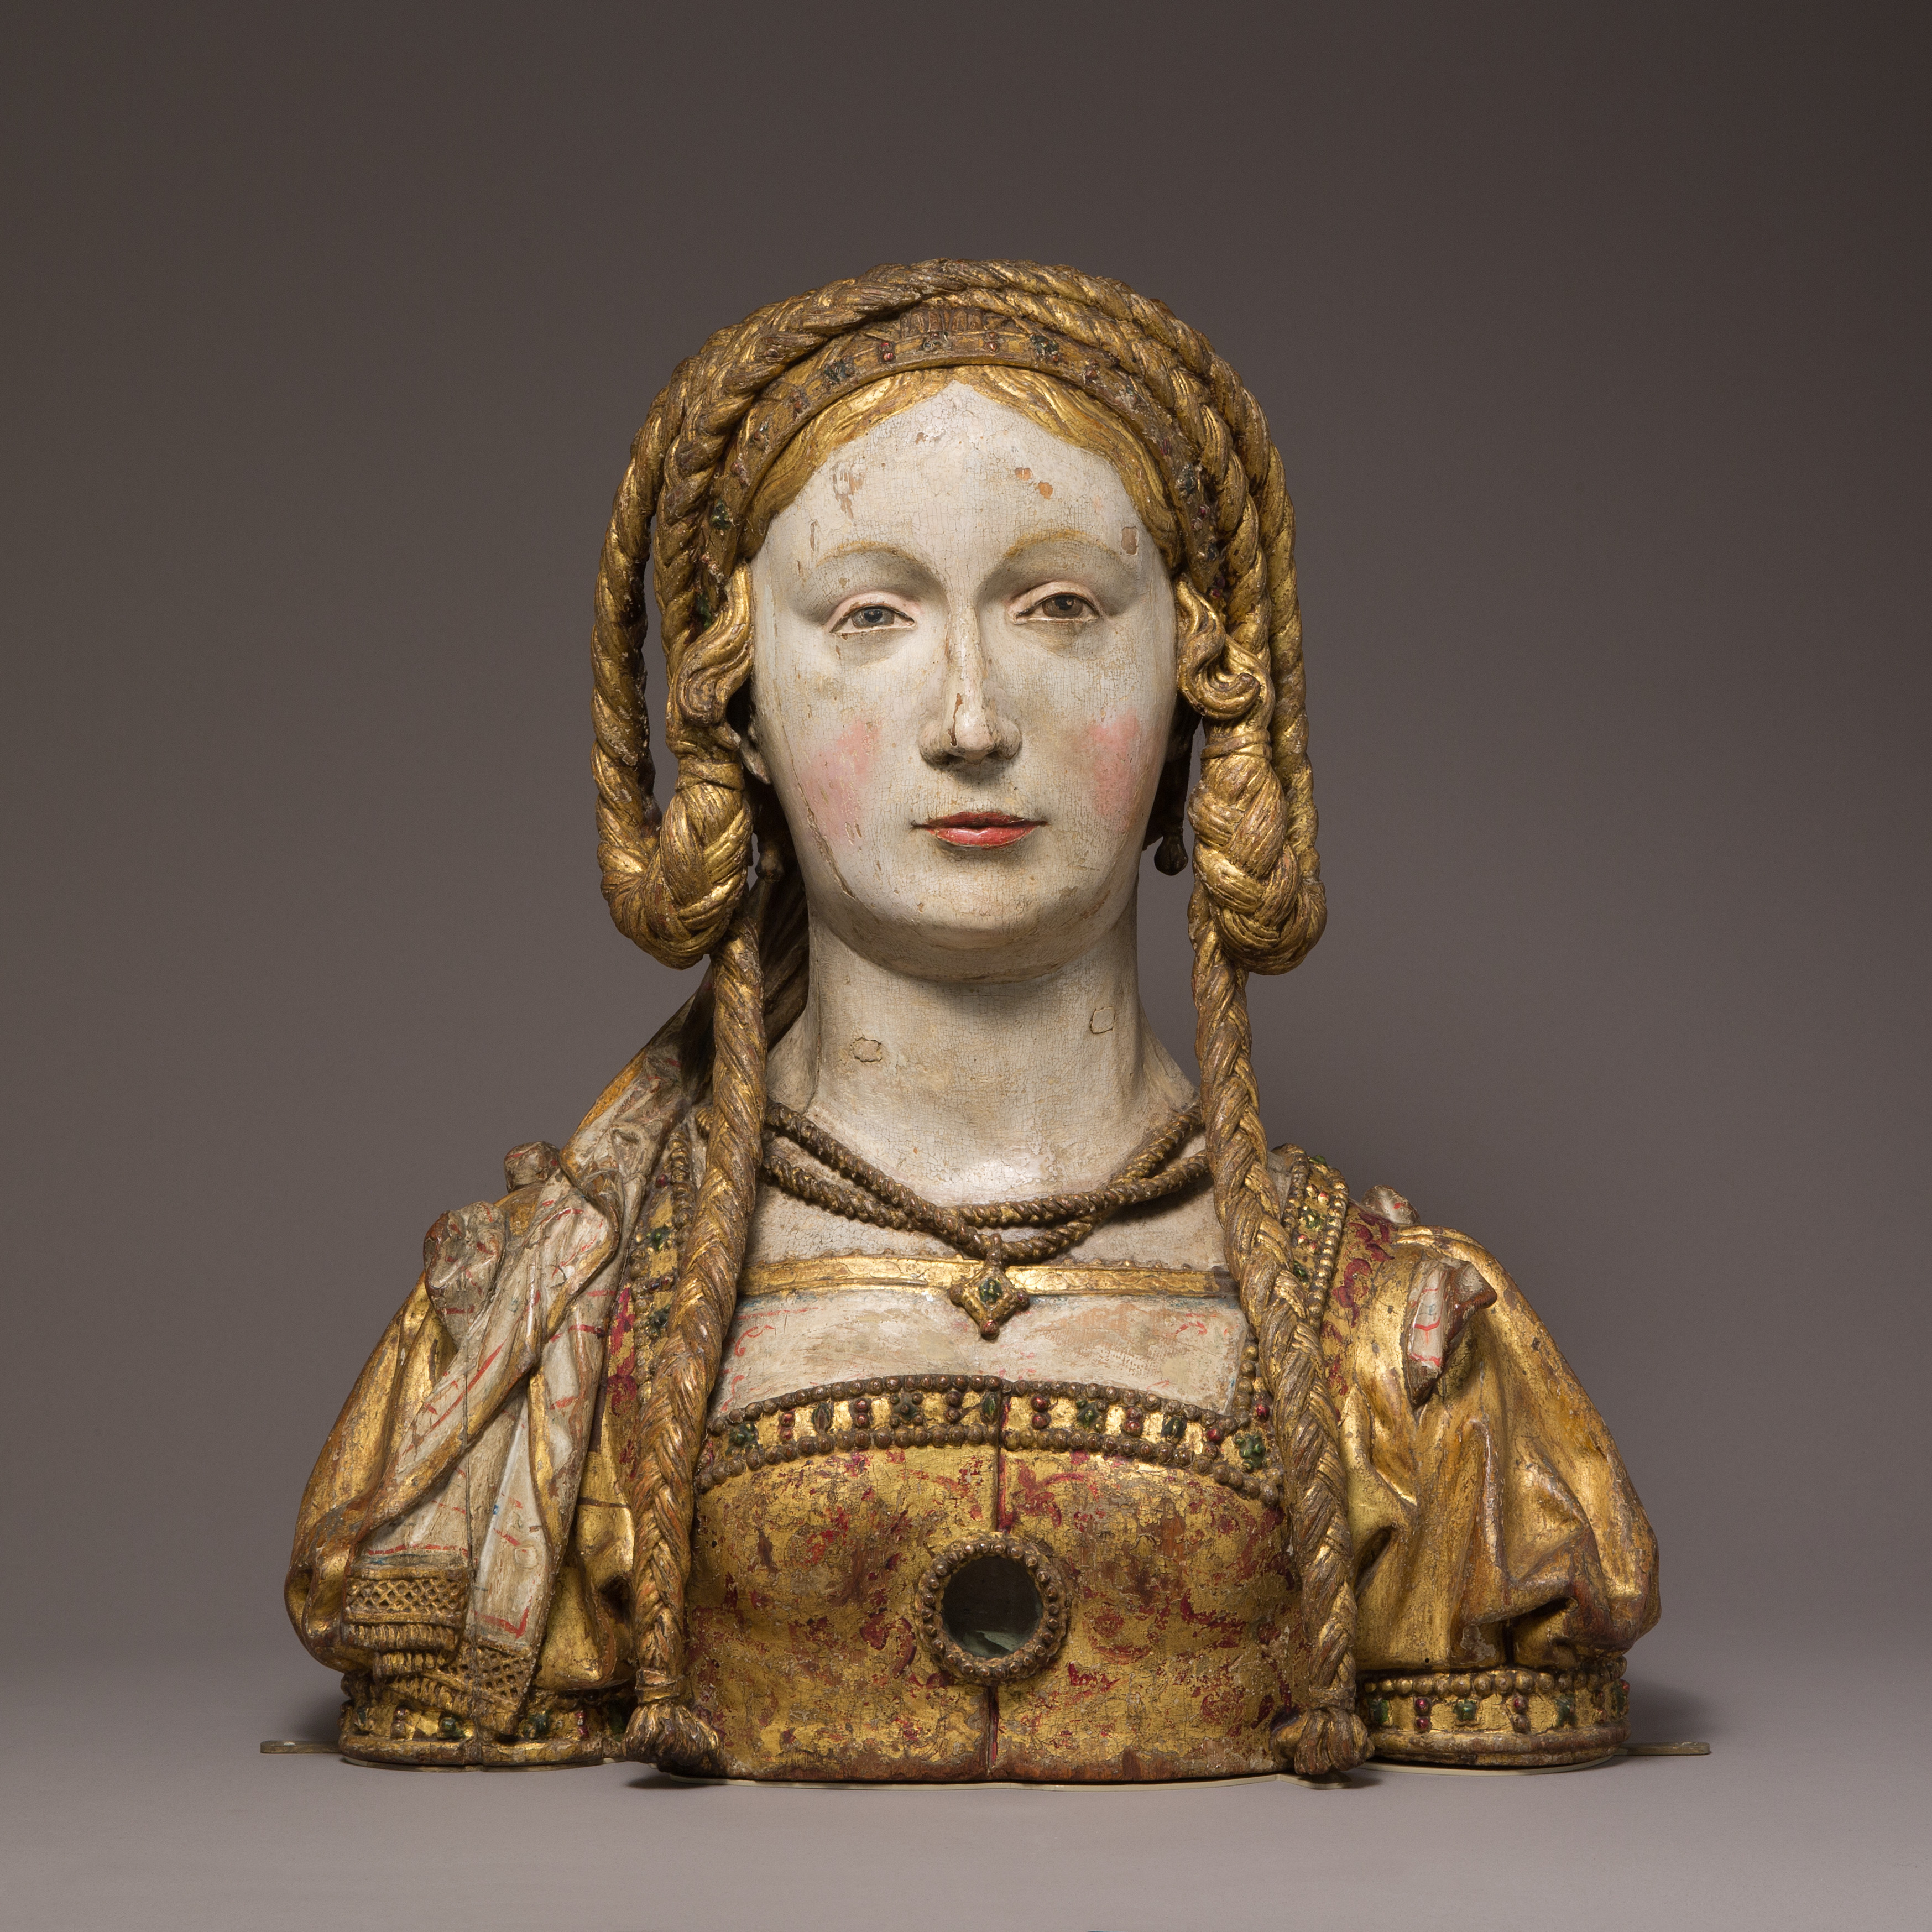 The Reliquary Bust of St. Balbina by Unknown Artist - c. 1520-1530 - 44.5 x 40.6 x 15.9 cm Metropolitan Museum of Art